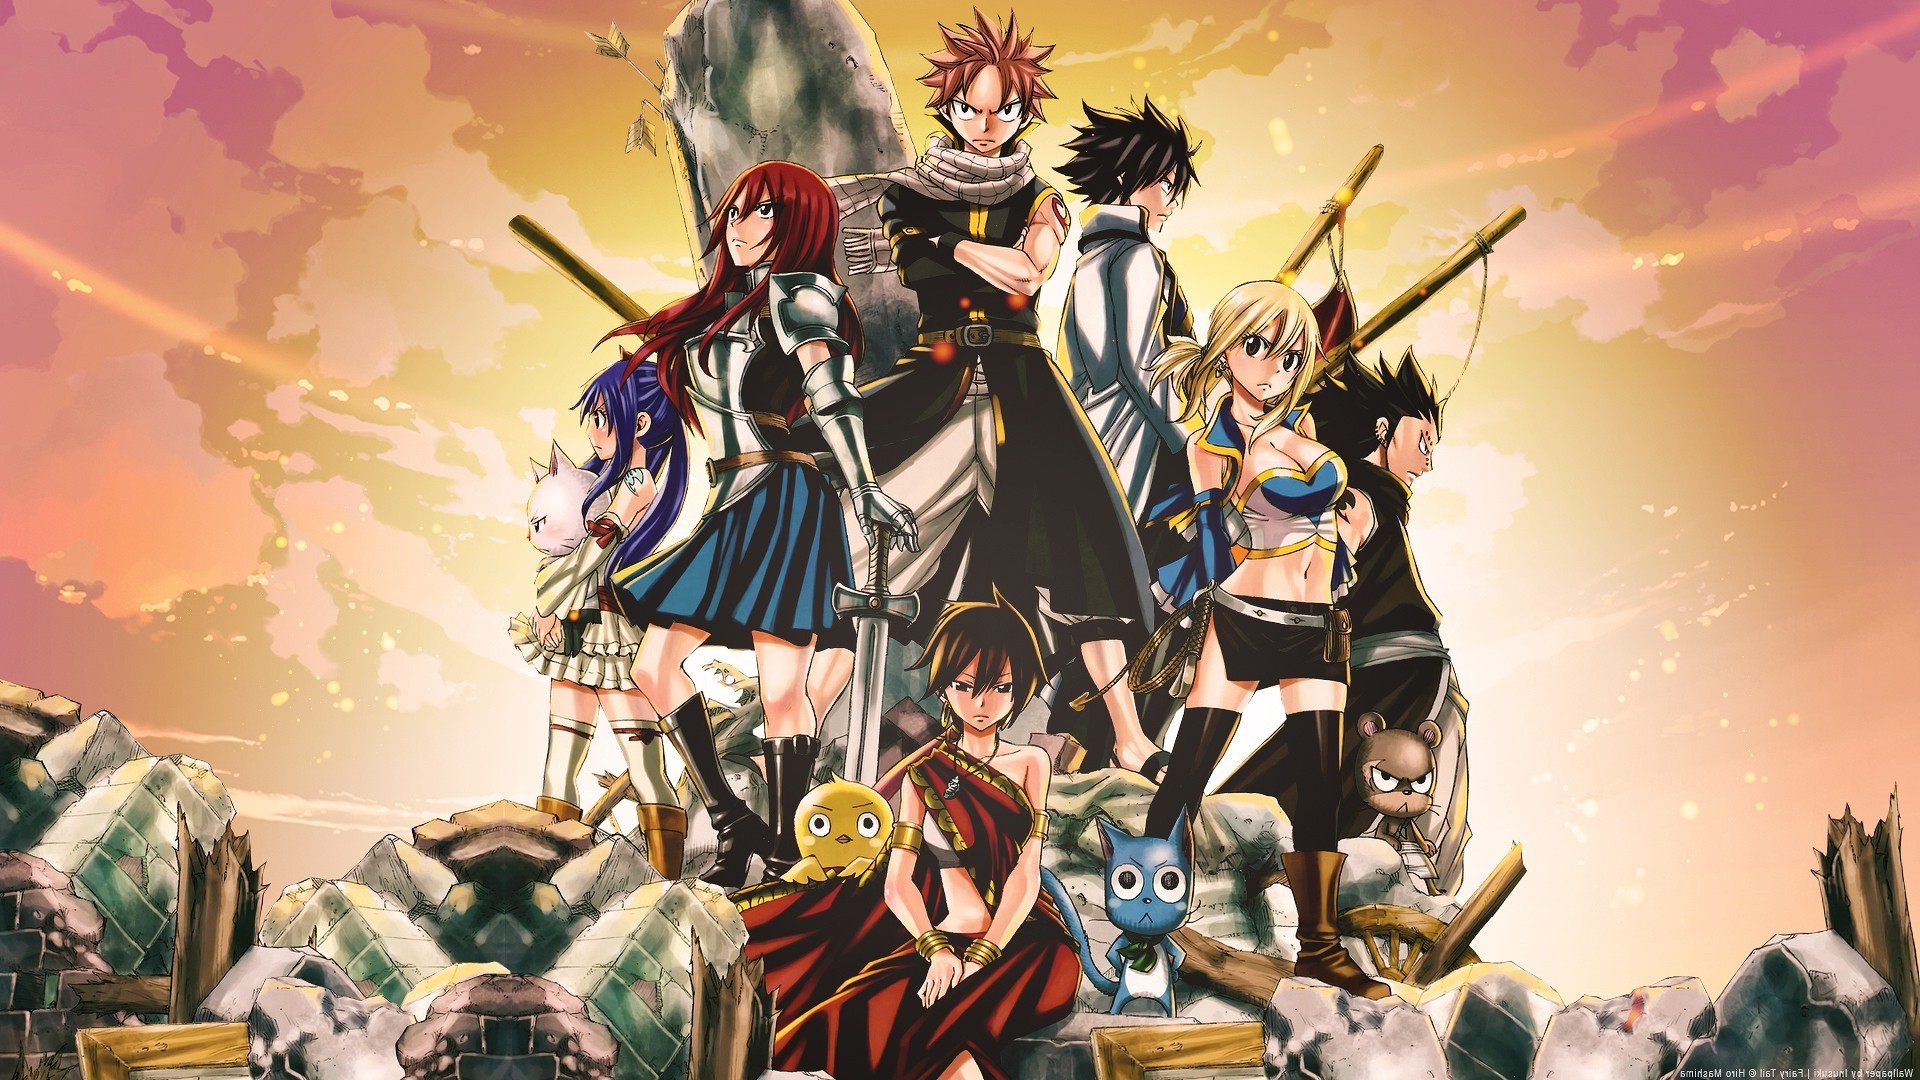 1920x1080 Fairy Tail, Dragneel Natsu, Scarlet Erza, Heartfilia Lucy, Fullbuster Gray,  Marvell